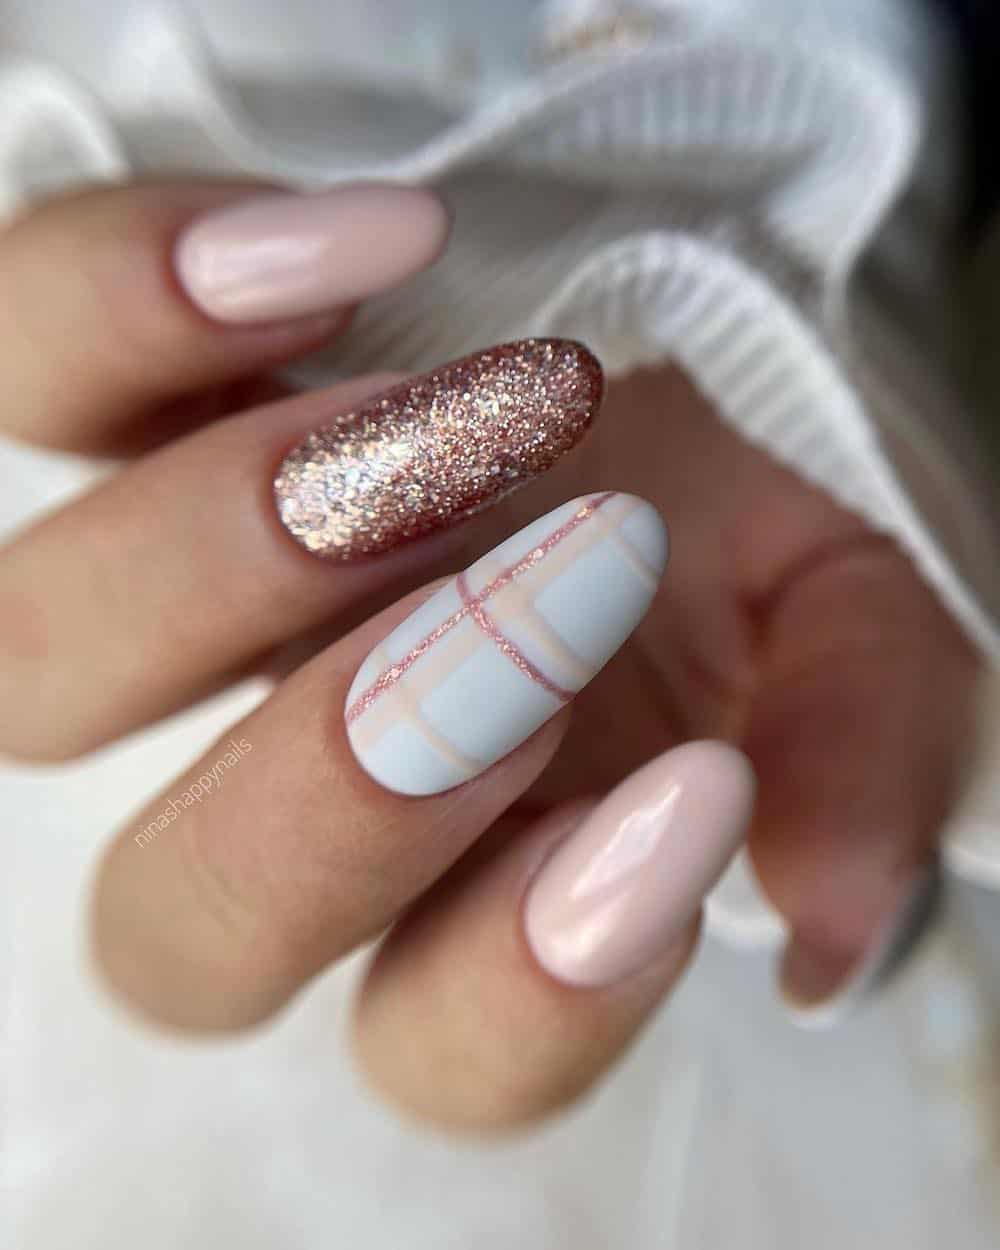 A hand with long almond nails painted with dusty pink nail polish, pink glitter, and plaid details